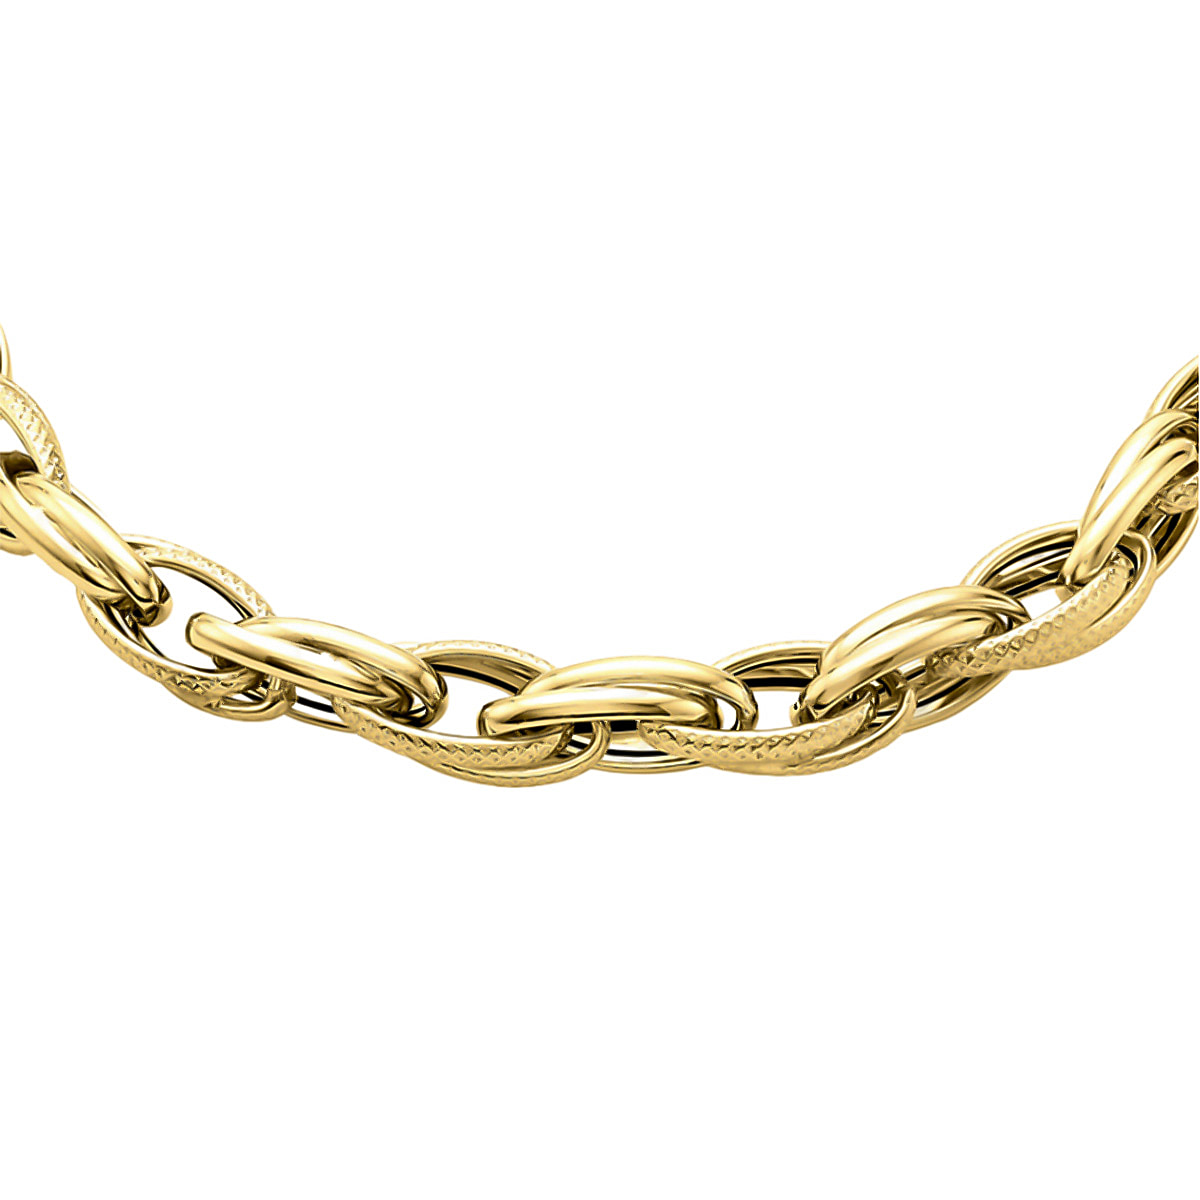 Vicenza Close Out - 9K Yellow Gold Textured & PRINCE of WALES Necklace (Size - 18), Gold Wt. 14.01 Gms